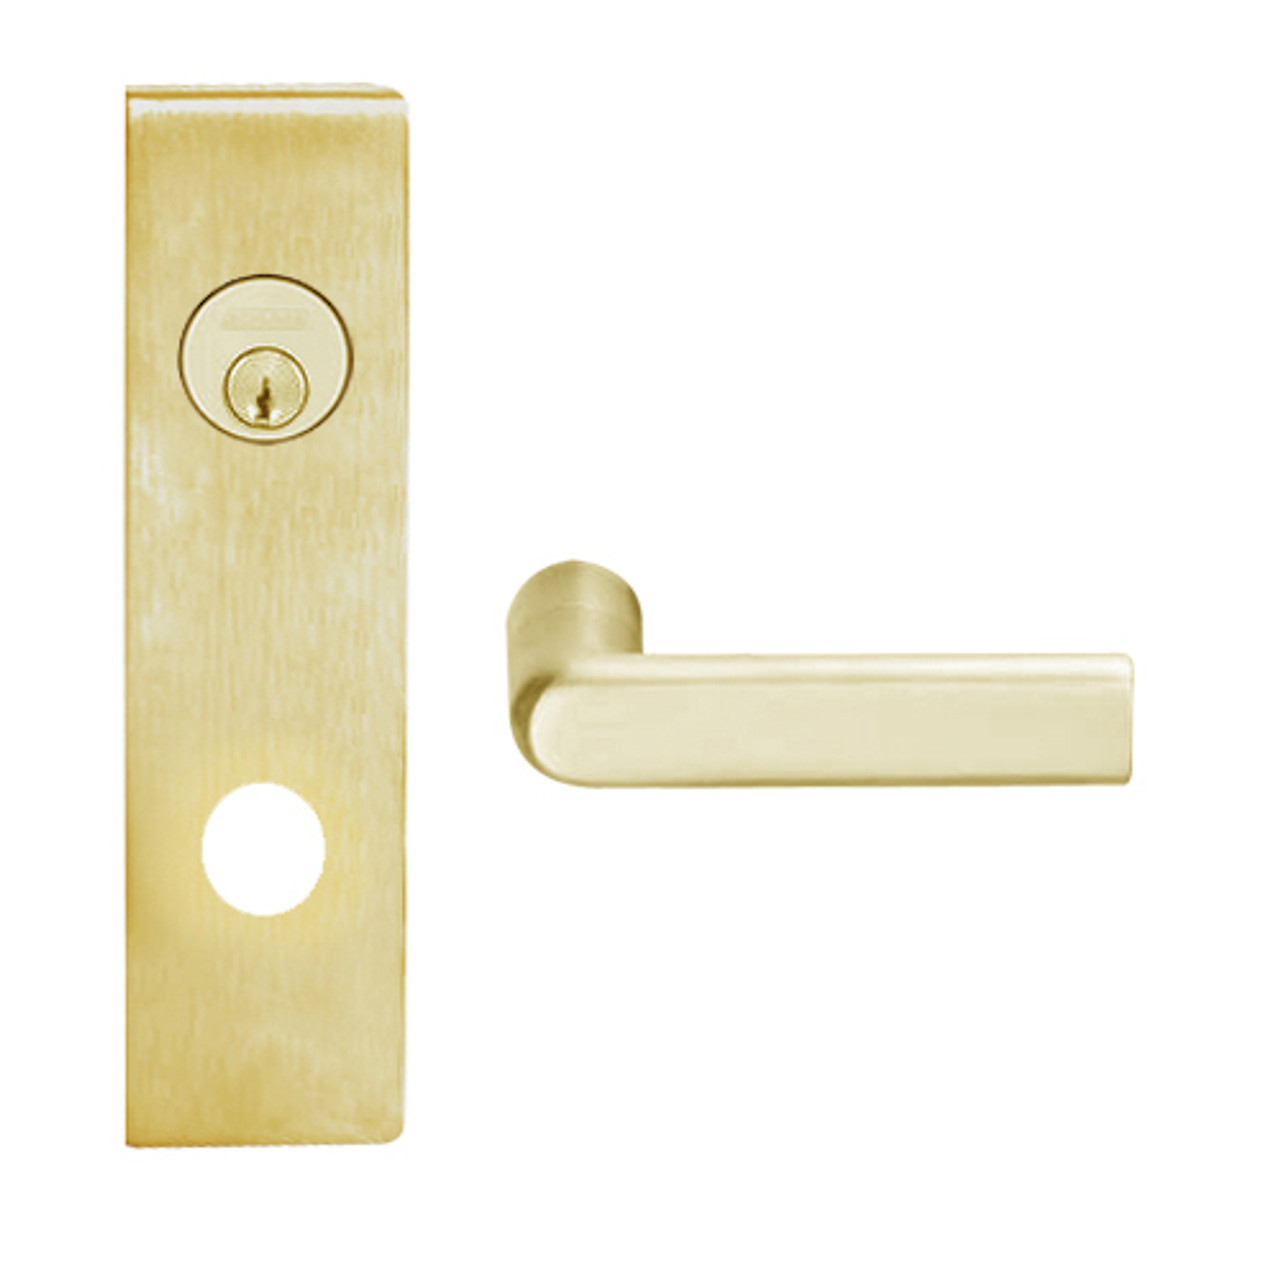 L9456L-01N-606 Schlage L Series Less Cylinder Corridor with Deadbolt Commercial Mortise Lock with 01 Cast Lever Design in Satin Brass